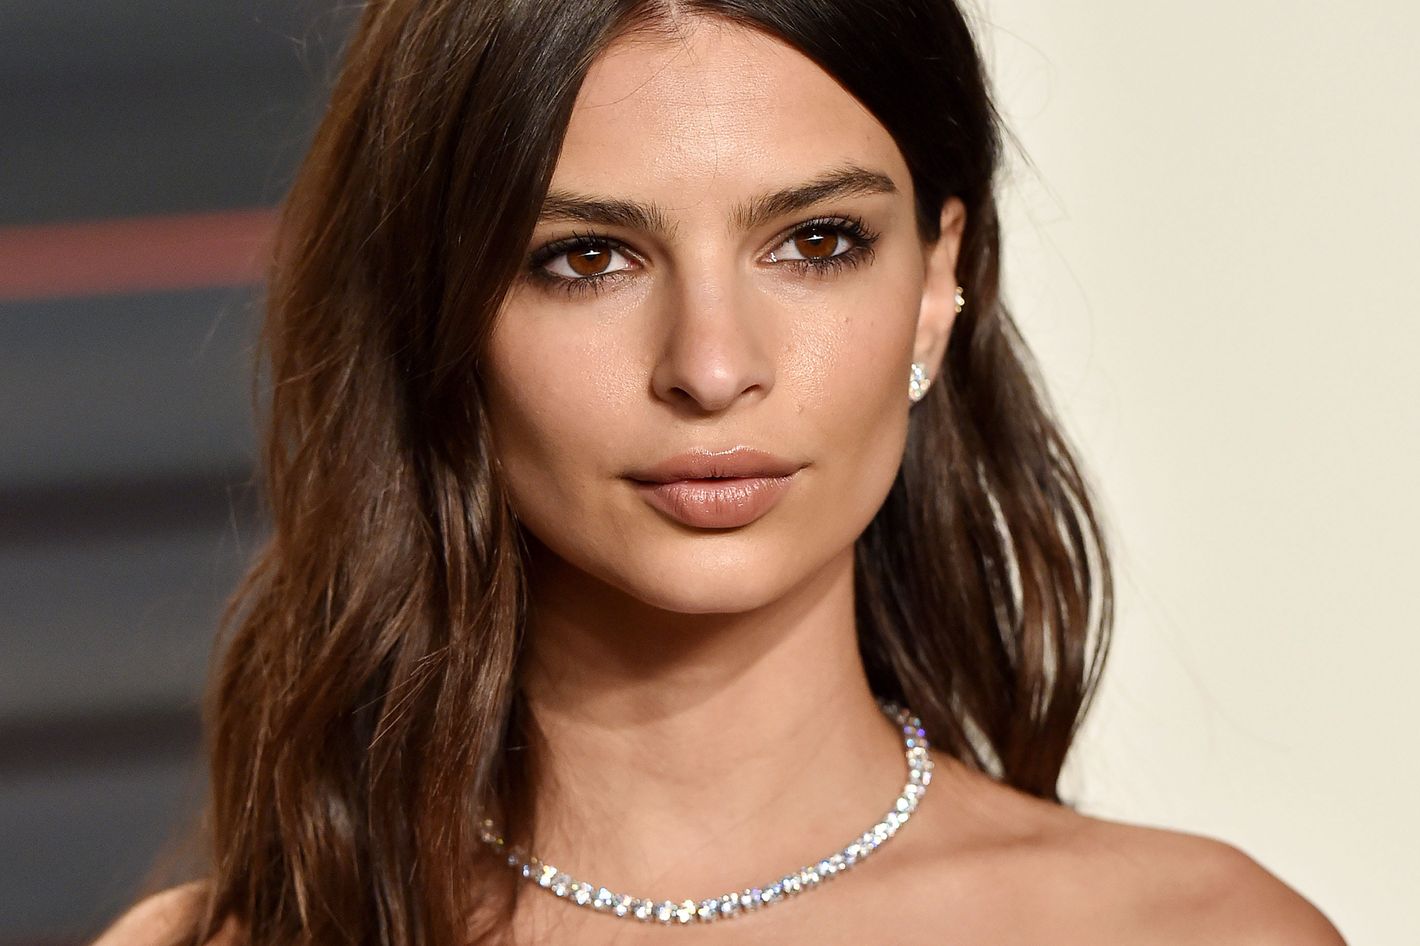 Emily Ratajkowski Is Smart and Cool, Get Over It